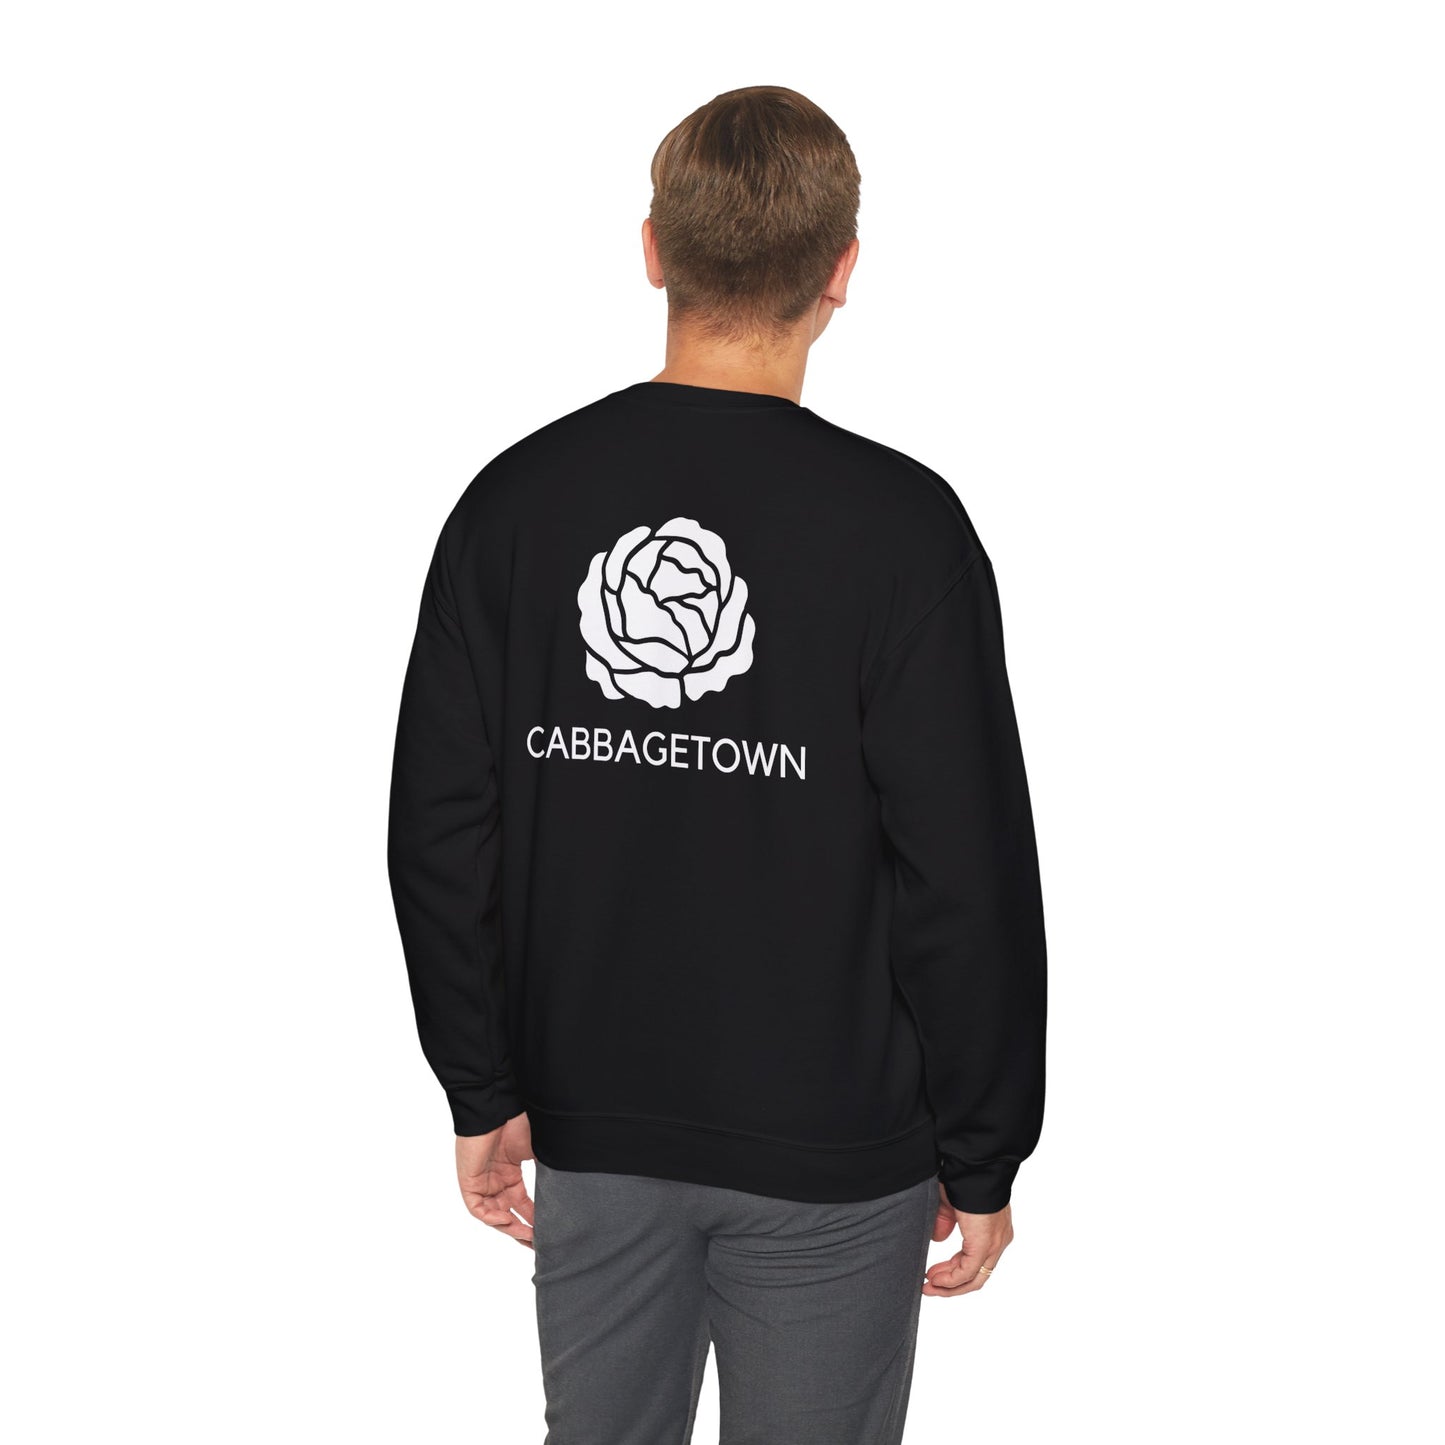 A man from behind wearing a black Unisex Heavy Blend™ Crewneck Monochrome Logo and Cabbagetown Sweatshirt with a white cabbage design and the word "CABBAGETOWN TORONTO" printed below it by Printify.